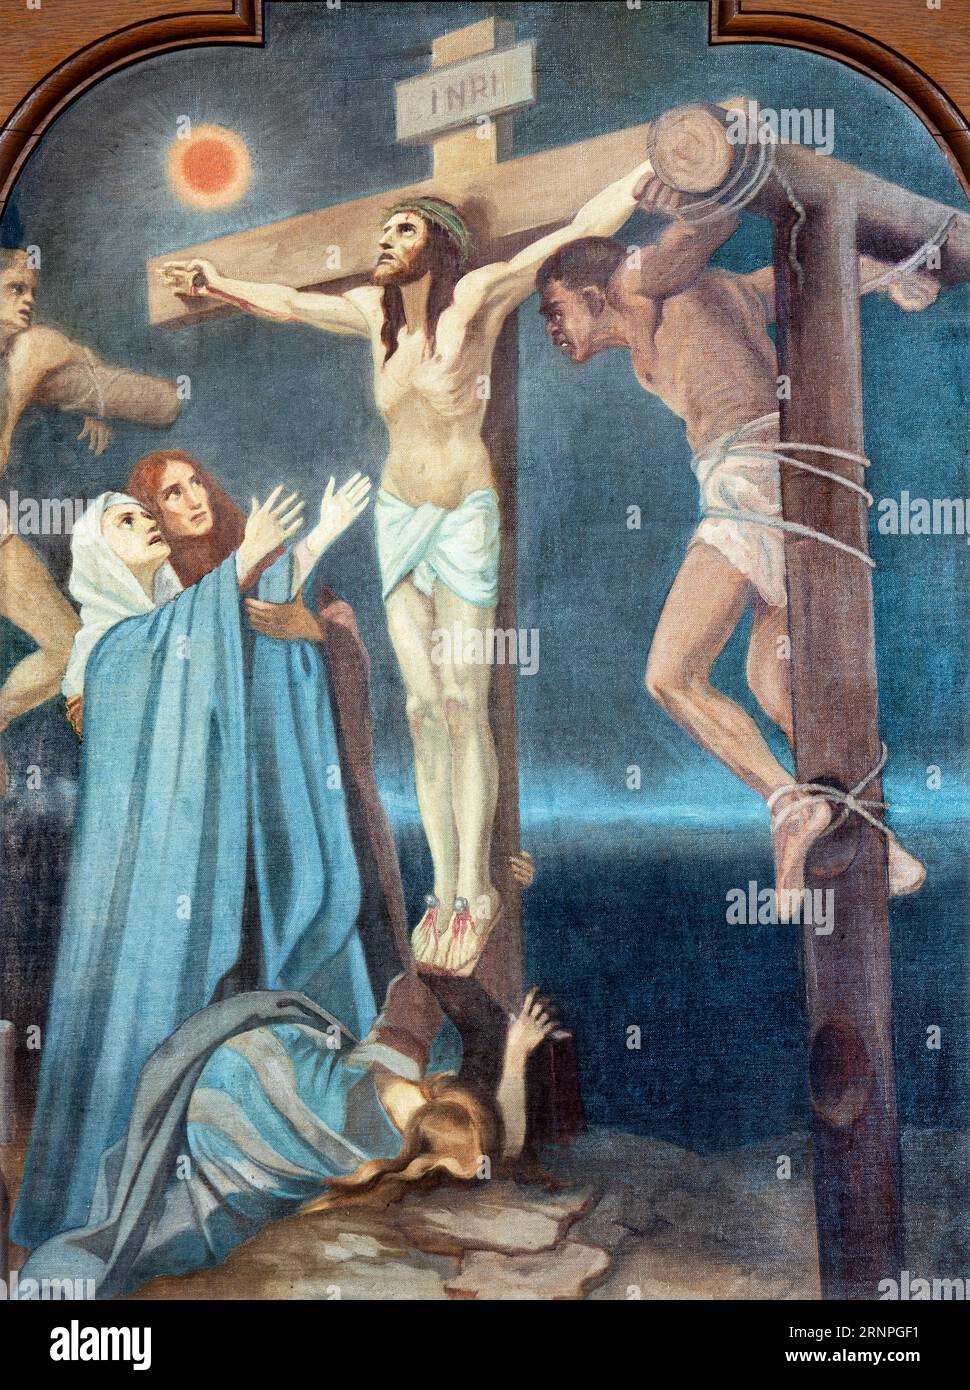 SEBECHLEBY, SLOVAKIA - OKTOBERT 8, 2022: The painting Crucifixion as part of Cross way stations in St. Michael parish church by unkonwn artist Stock Photo